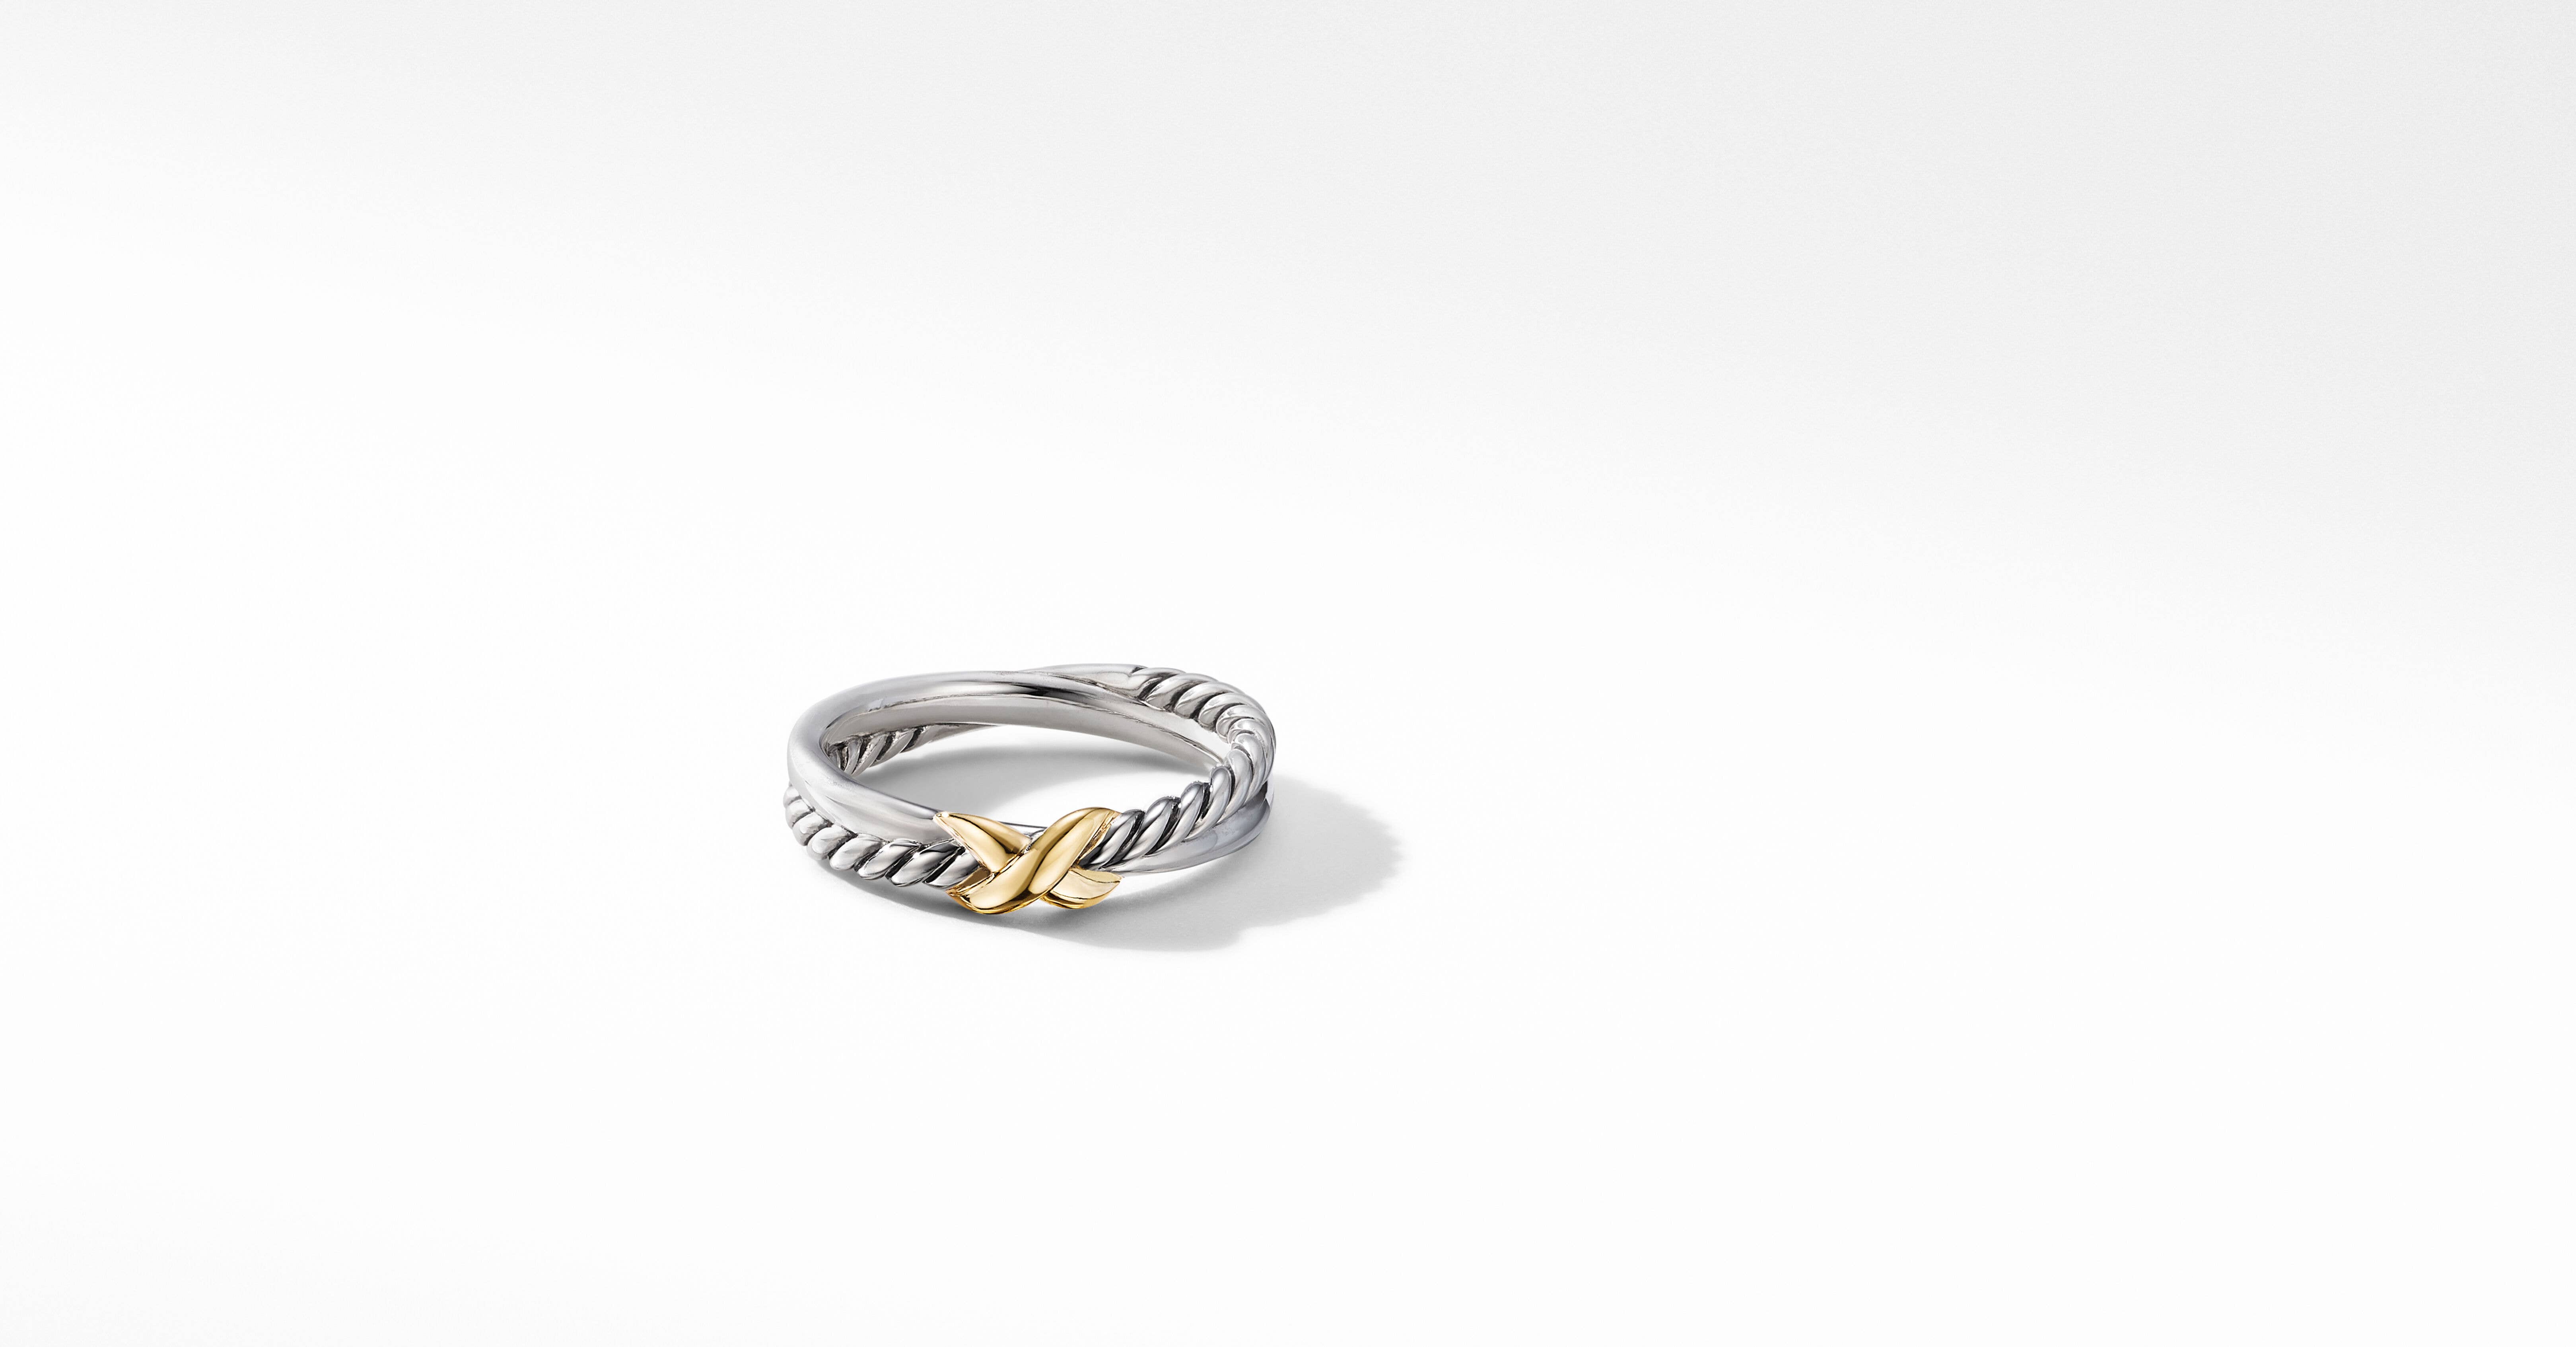 David Yurman | Petite X Ring in Sterling Silver with 18K Yellow Gold